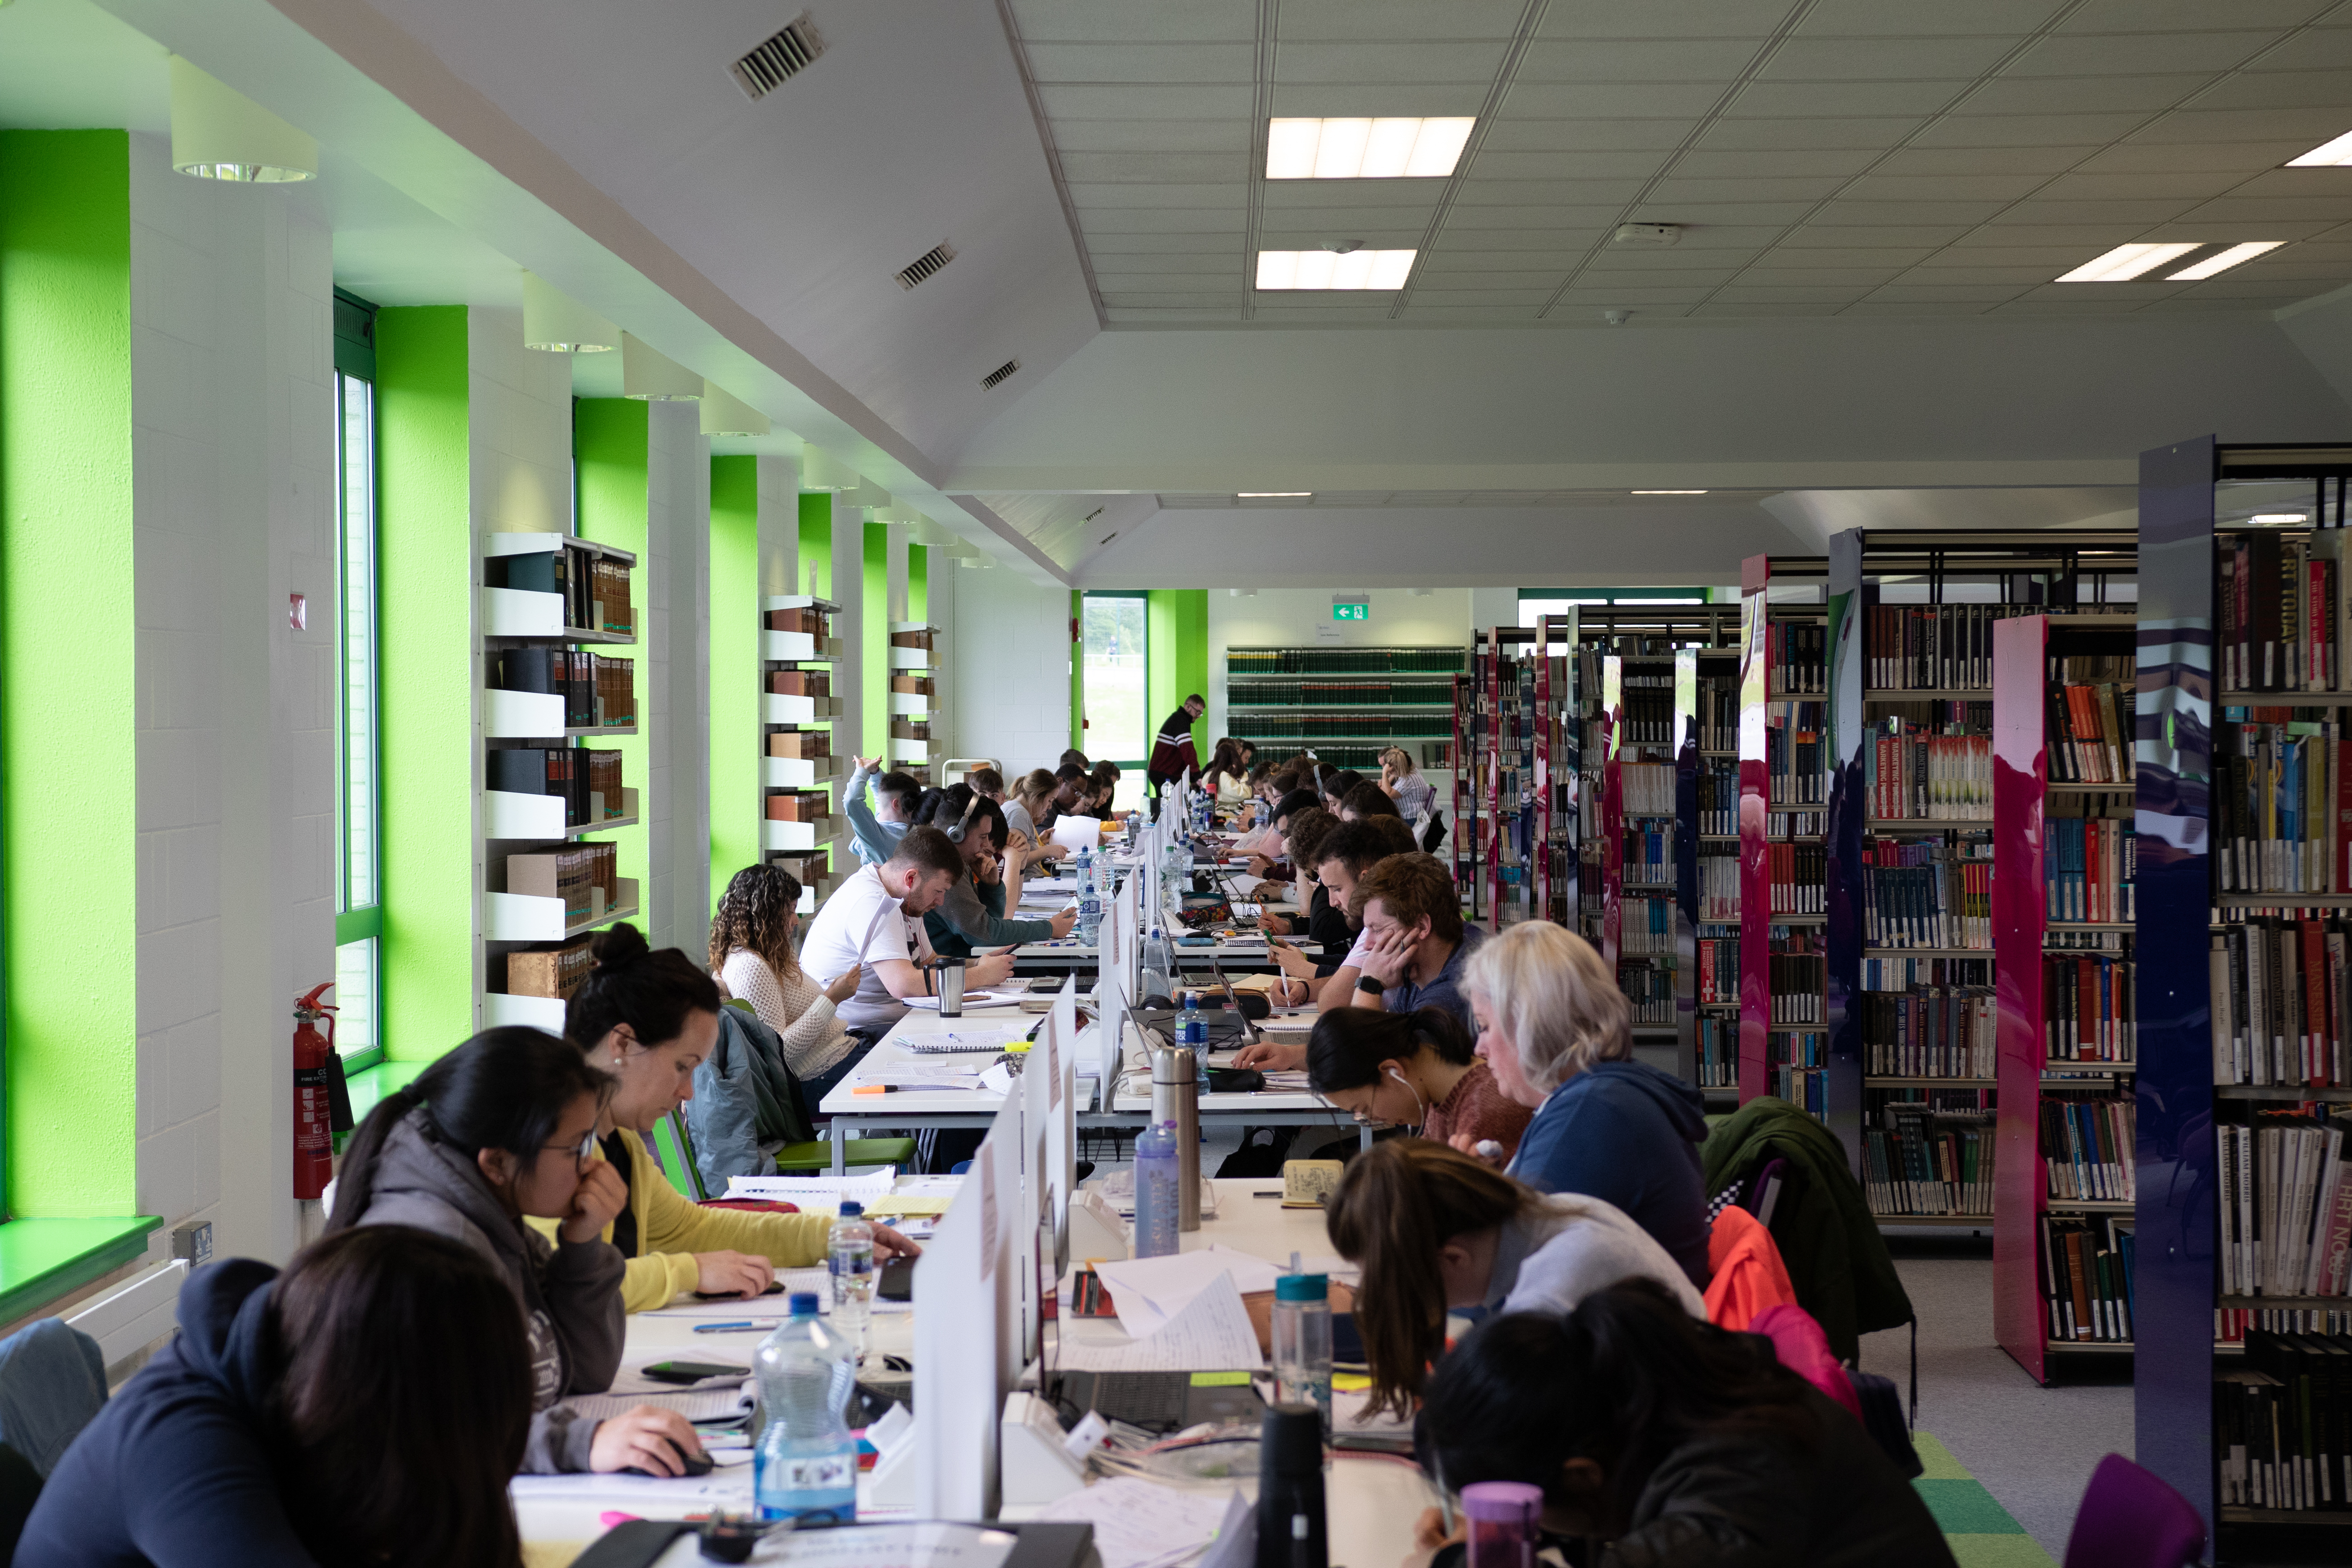 long row of study desks with students studying